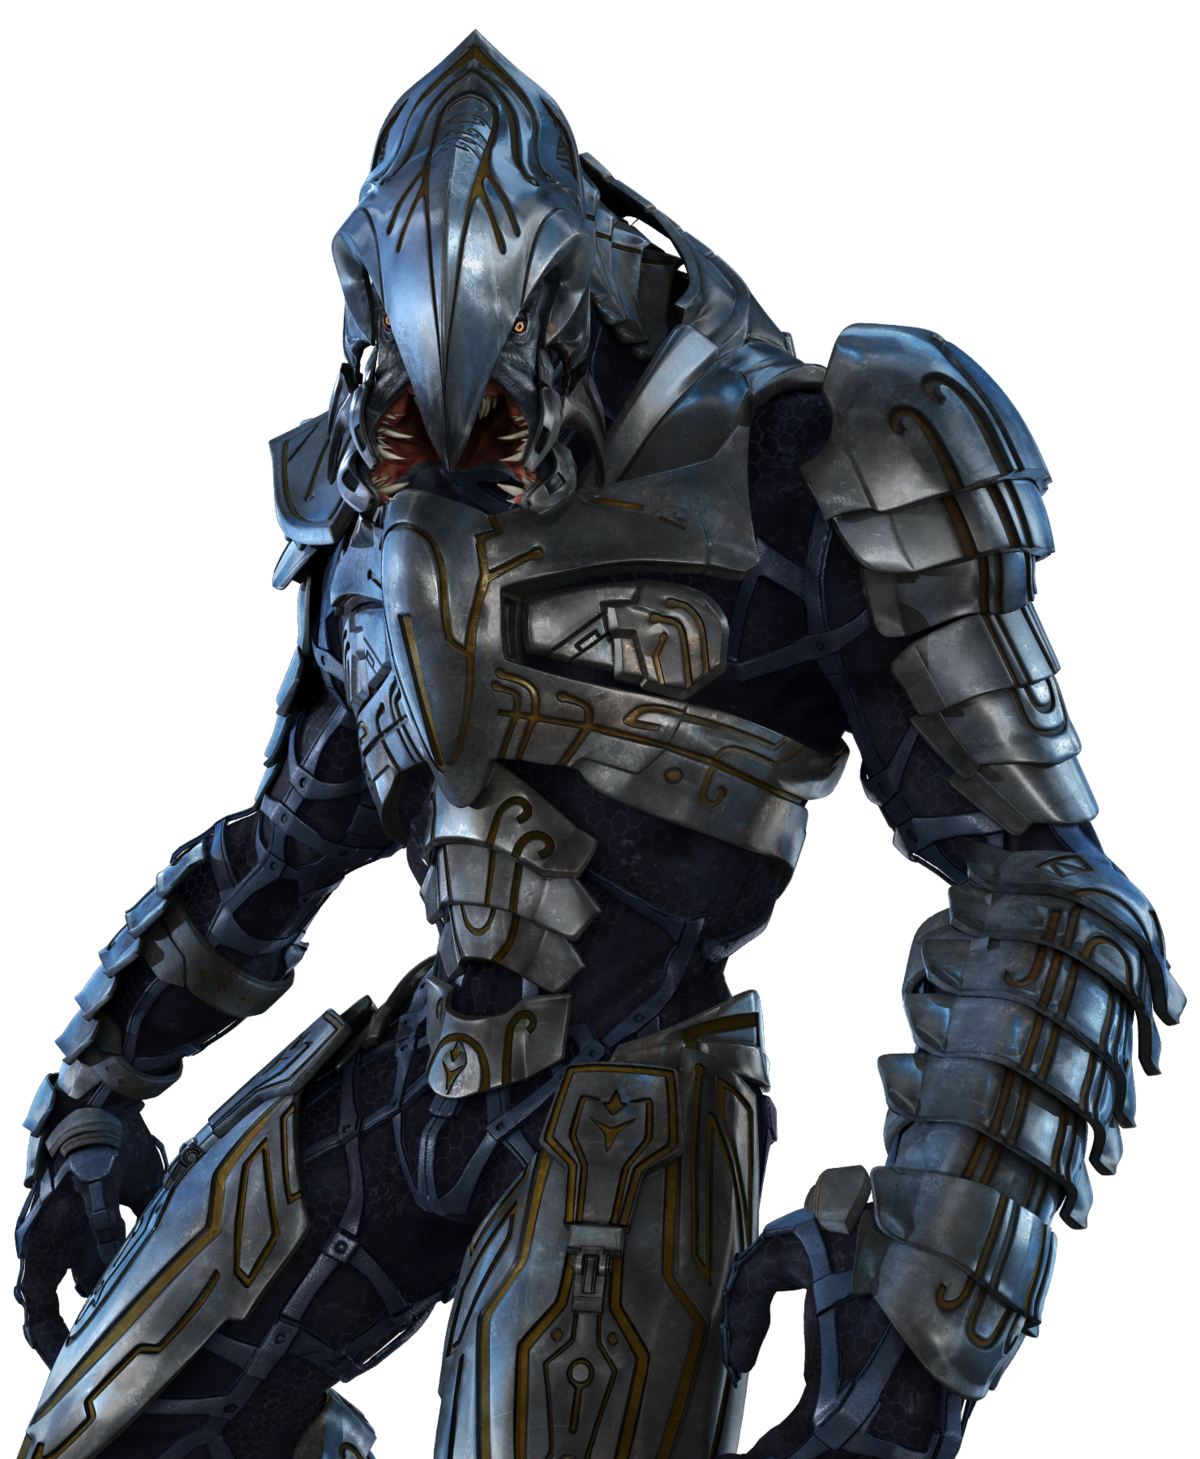 Ripa 'Moramee, the Savage, was a Sangheili warlord and military co...